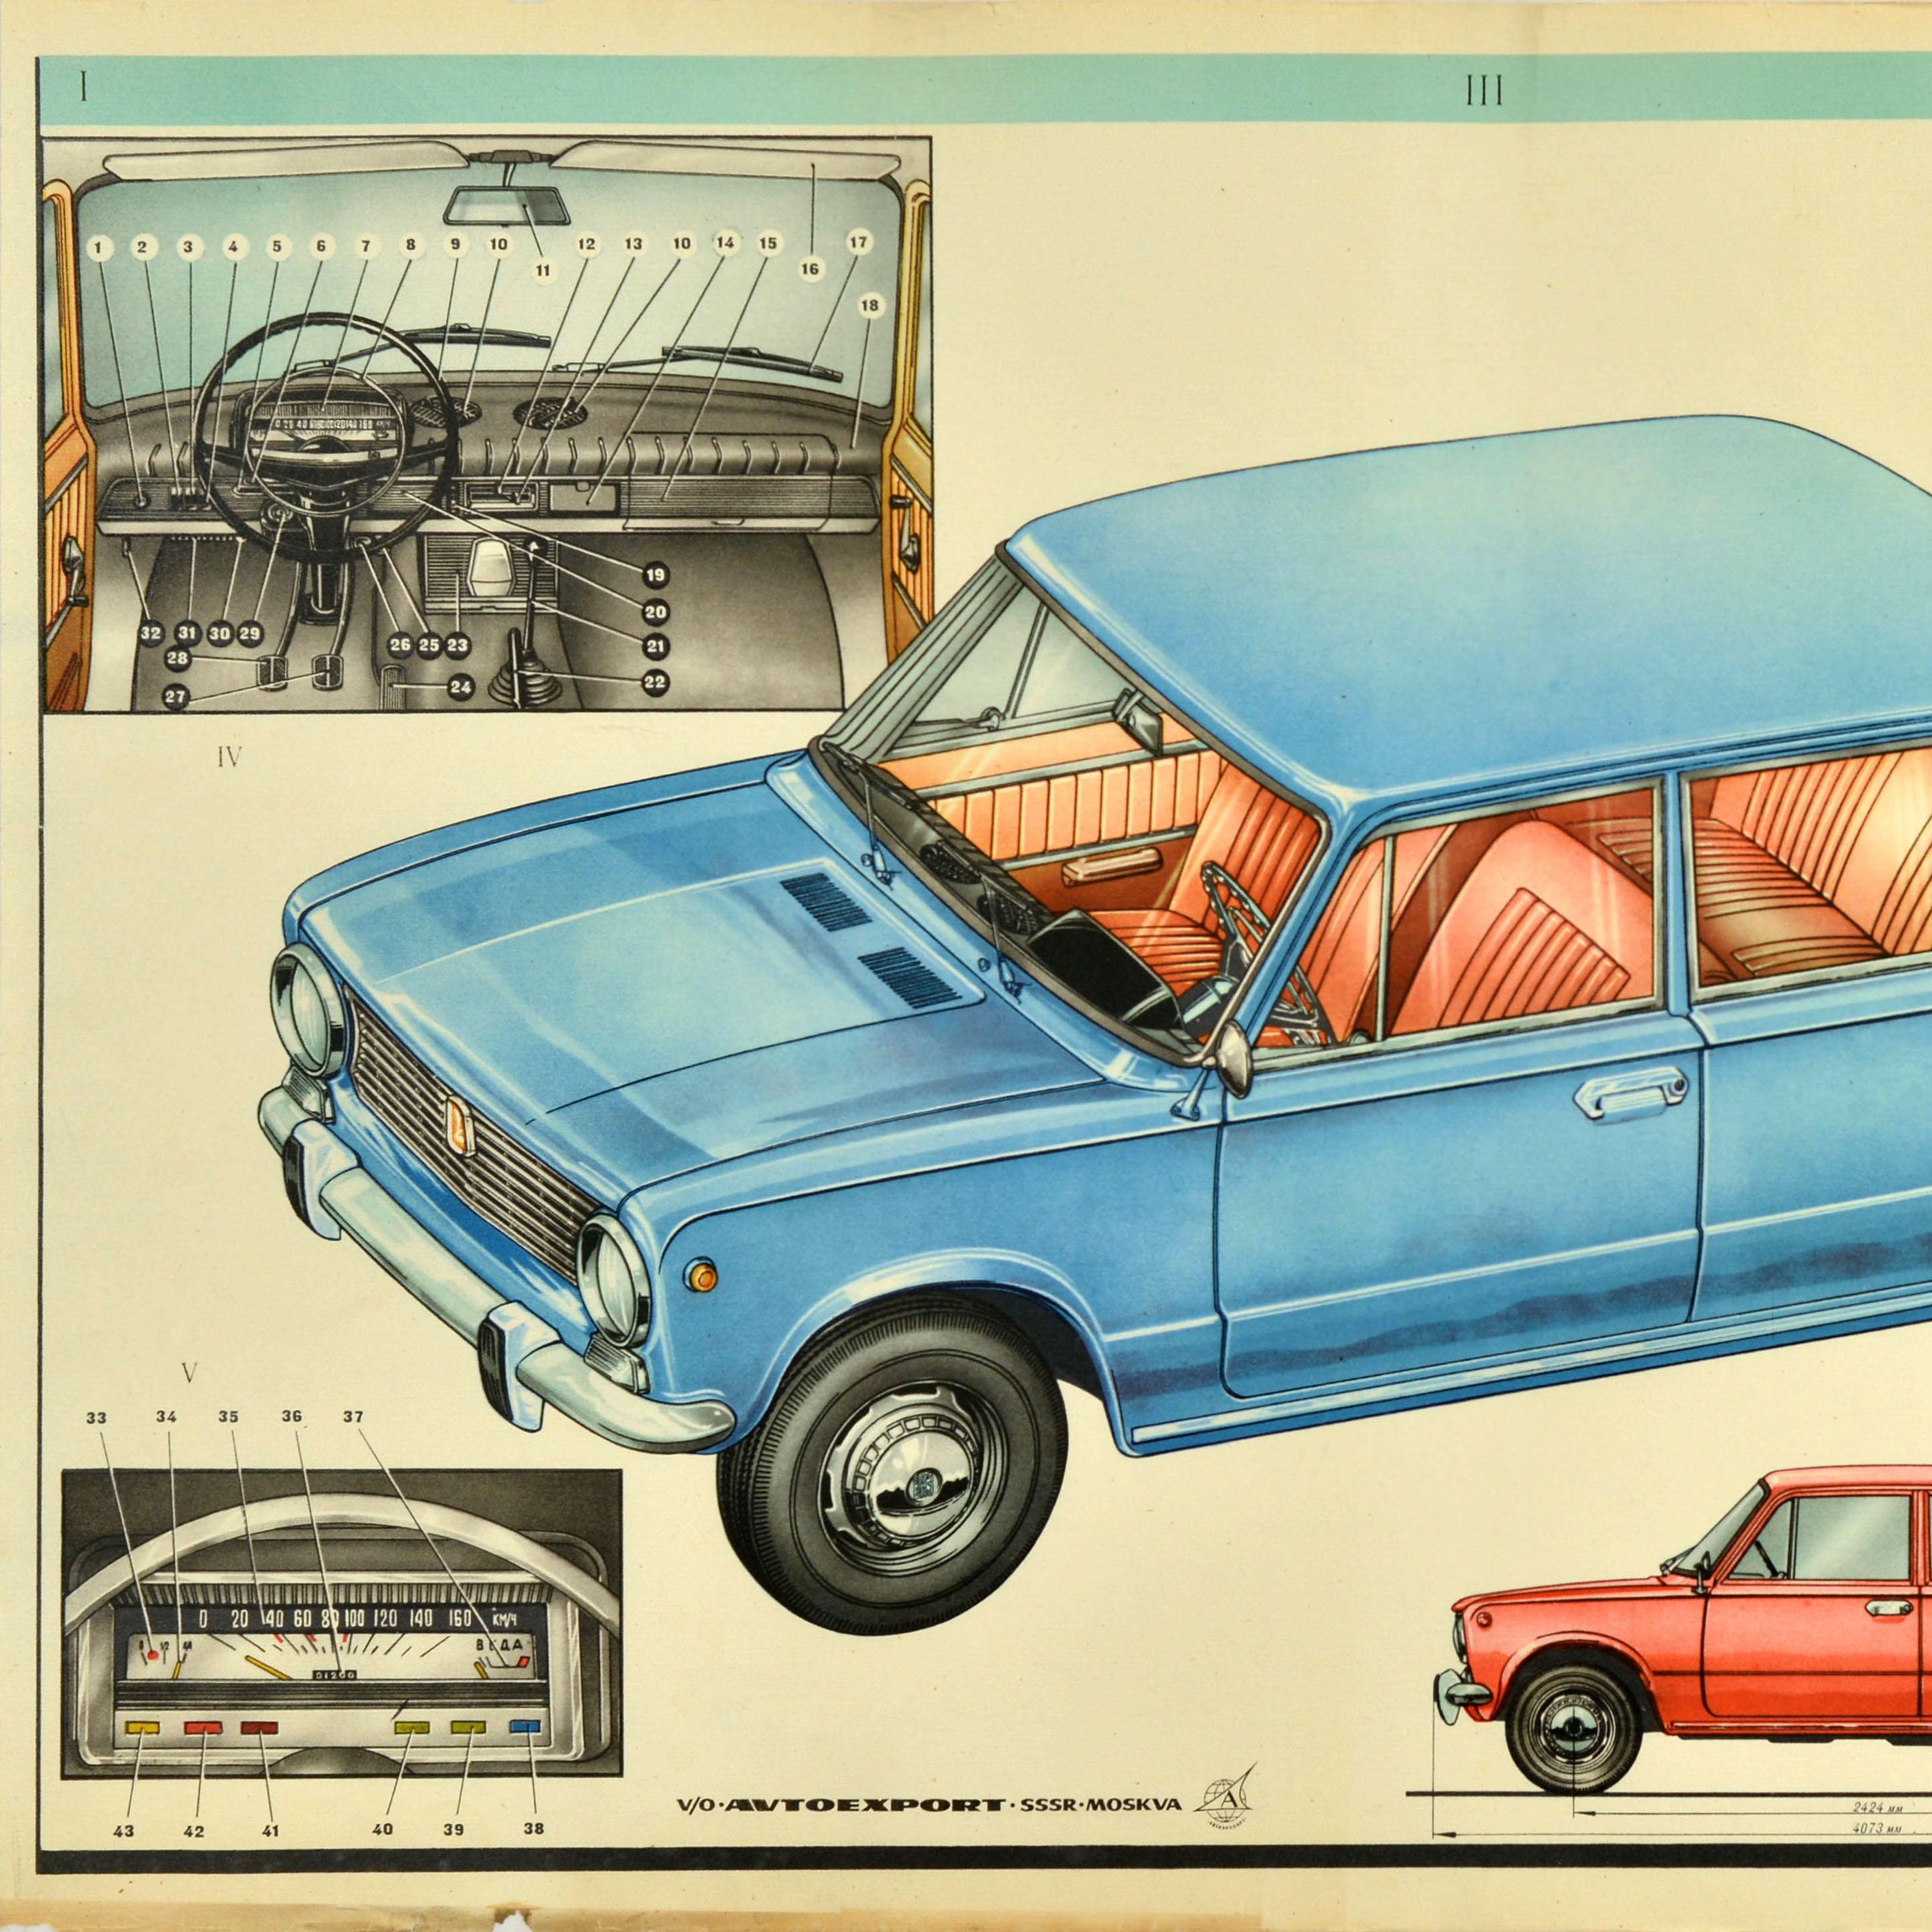 Original vintage car advertising poster for Lada showing the exterior and the interior of the vehicle with smaller images of the dashboard and panel board as well as the dimensions of the car from the front and side, the text below - v/o Avtoexport